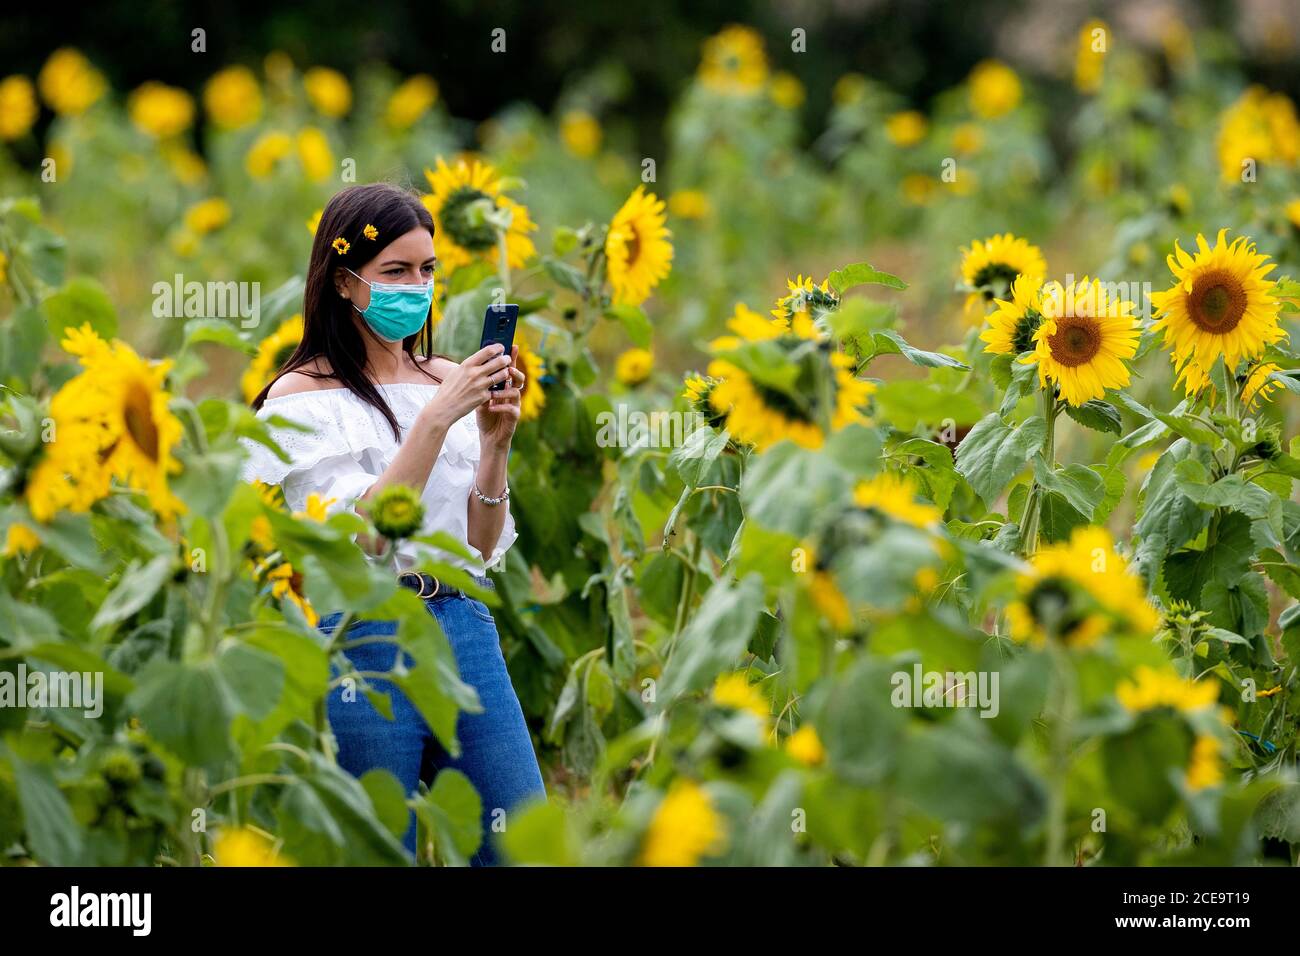 Laura Gillan on day trip from Derry City takes a picture of the sunflowers at the Sunflower Field Portglenone, on Bank Holiday Monday in Northern Ireland. The Sunflower Field is grow annually and the owners asking for a small fee to enter with proceeds this year for Versus Arthritis. Stock Photo